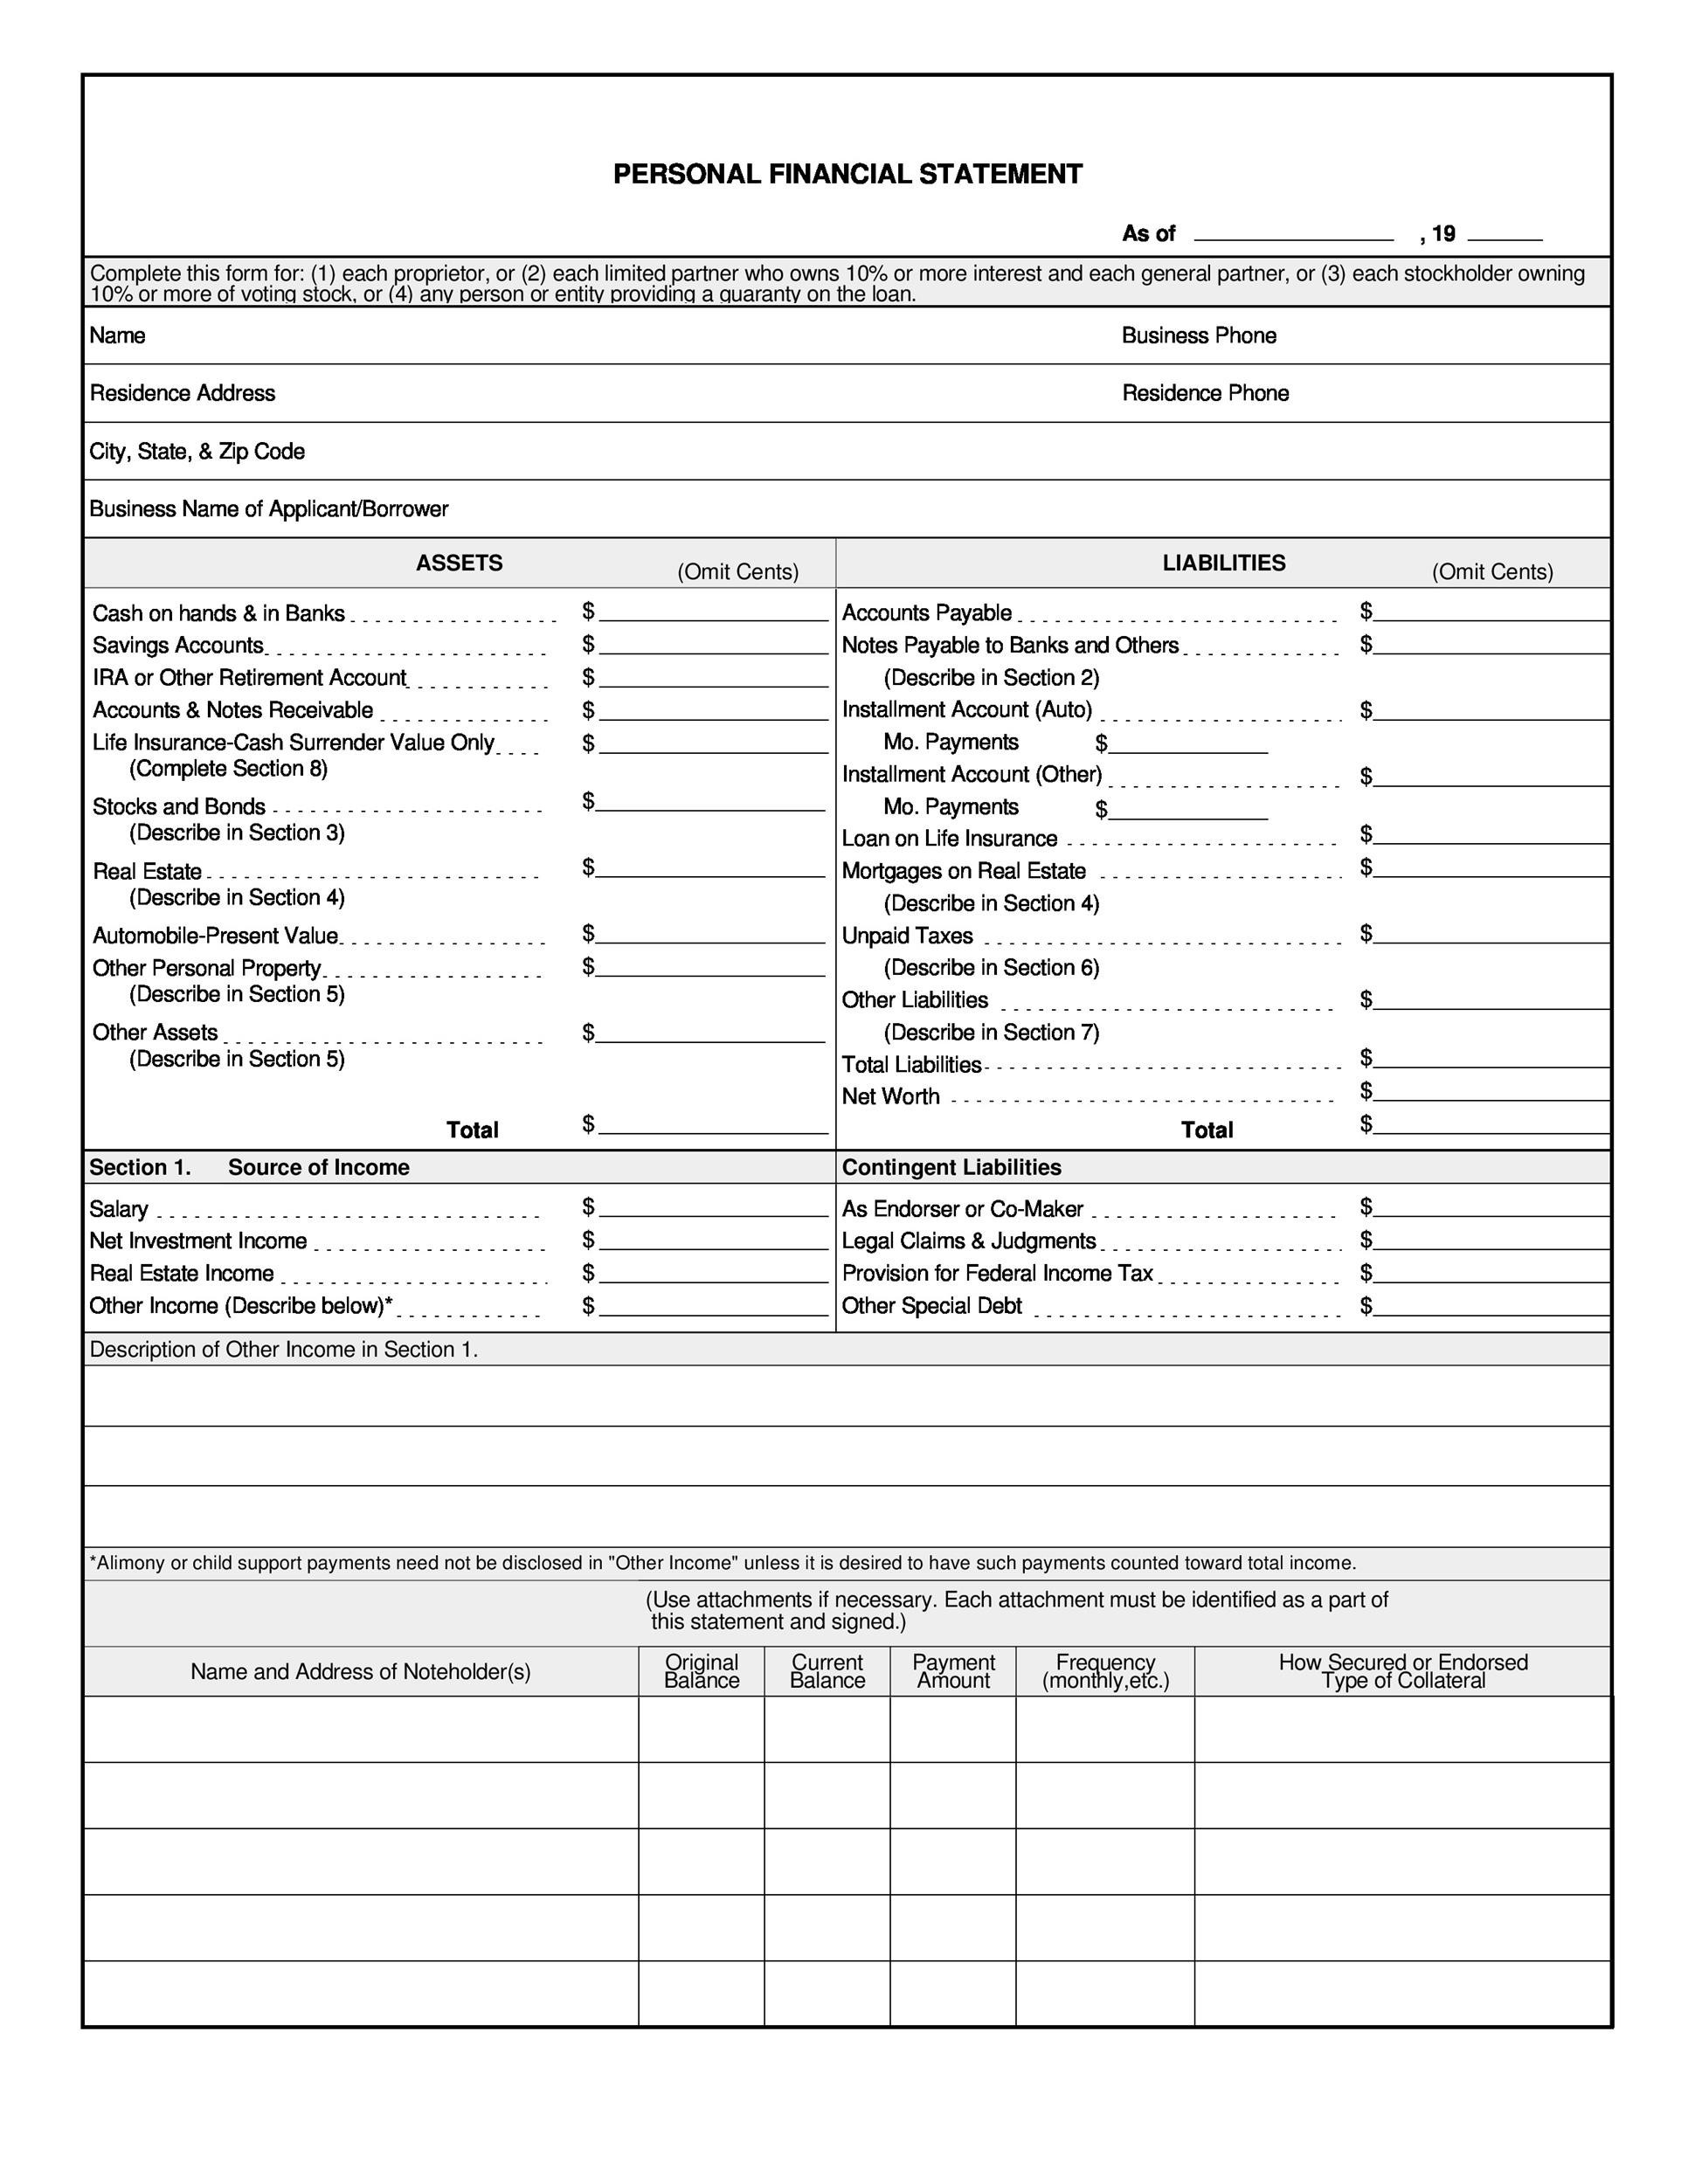 Personal Financial Statement Template Xls from templatelab.com